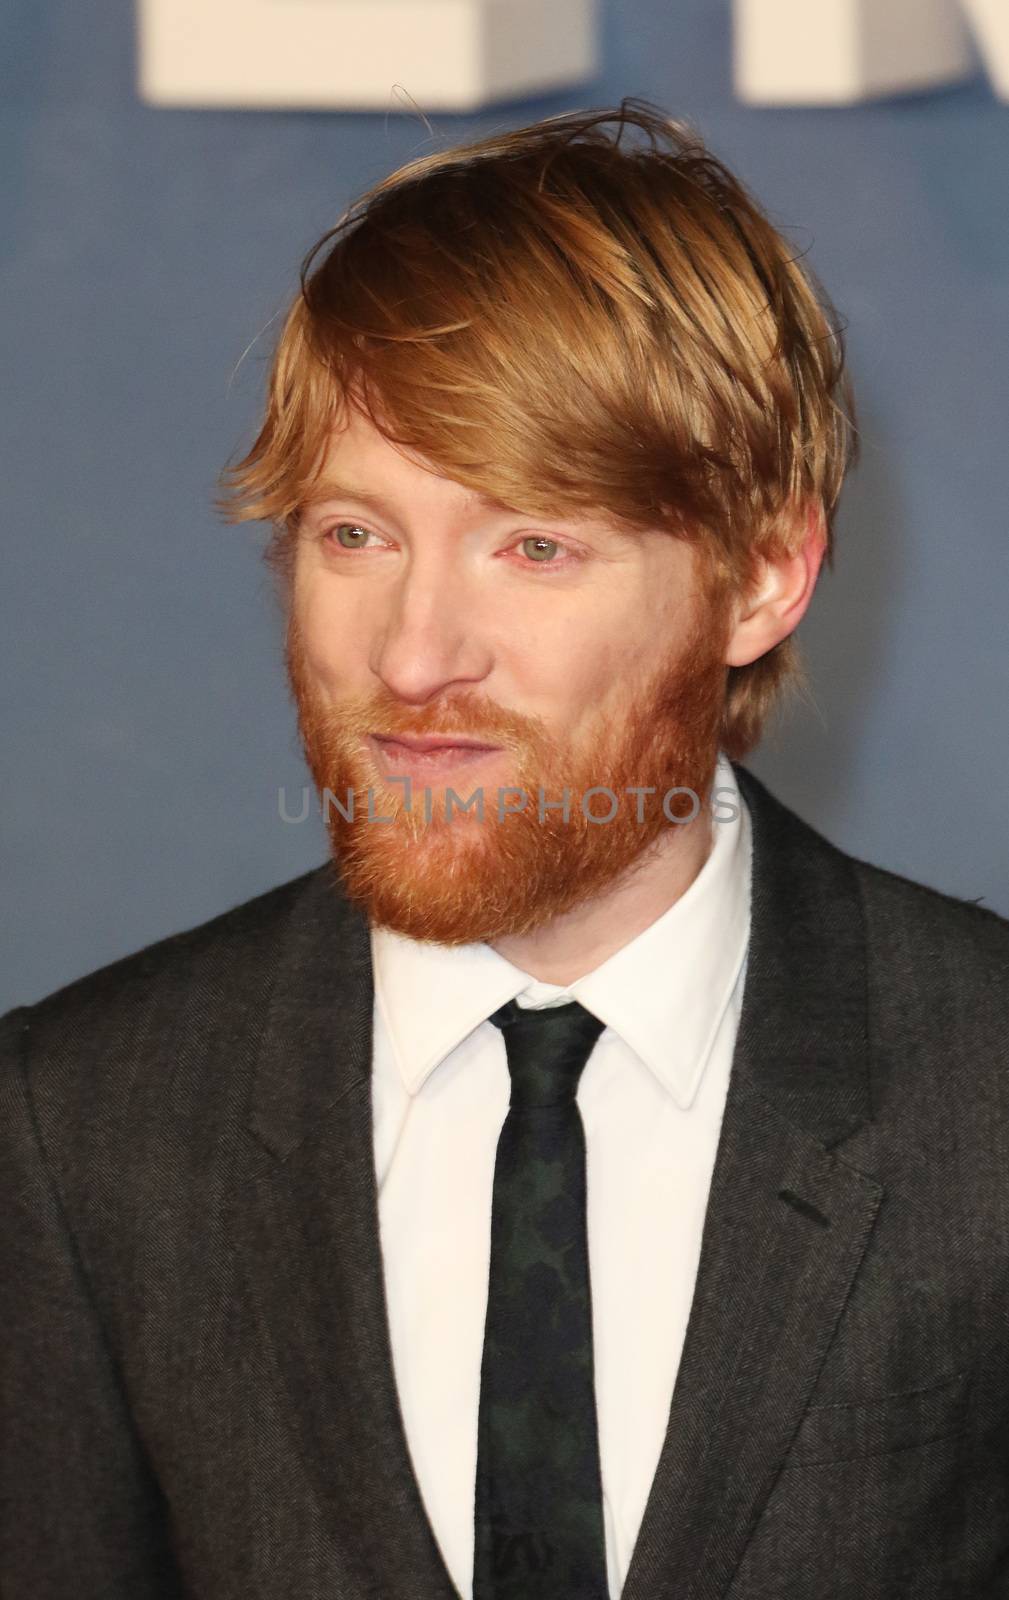 UK, London: Domhnall Gleeson arrives on the red carpet at Leicester Square in London on January 14, 2016 for the UK premiere of the Revenant, Alejandro Gonzalez Inarritu's Oscar-nominated film starring Leonardo DiCaprio.